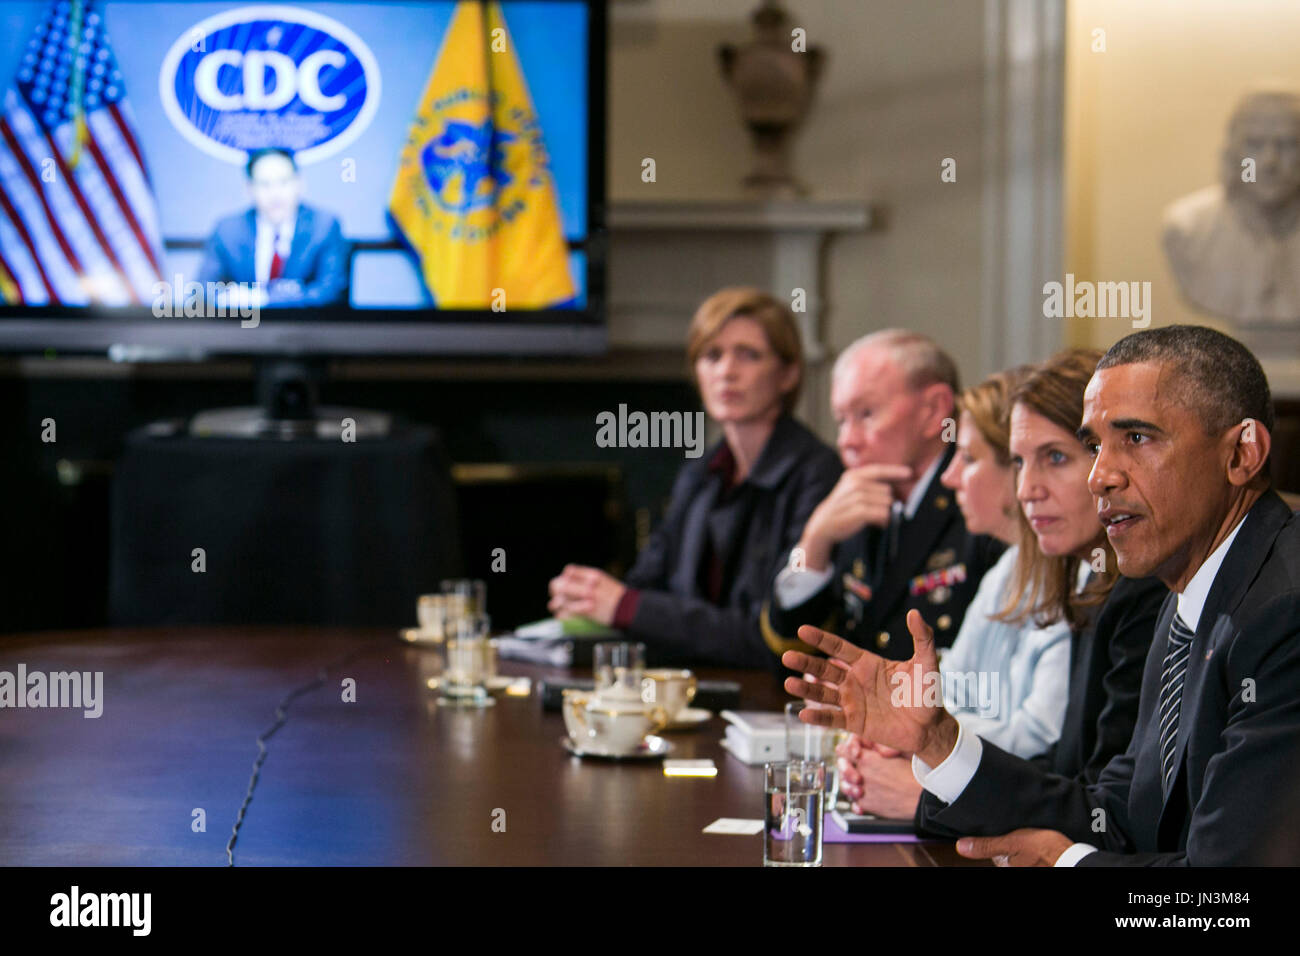 United States President Barack Obama delivers remarks during a cabinet  level meeting on the U.S. Government response to the Ebola epidemic in the Cabinet Room of the White House Washington, D.C., on Wednesday, October 15, 2014.  Credit: Kristoffer Tripplaar  / Pool via CNP Stock Photo